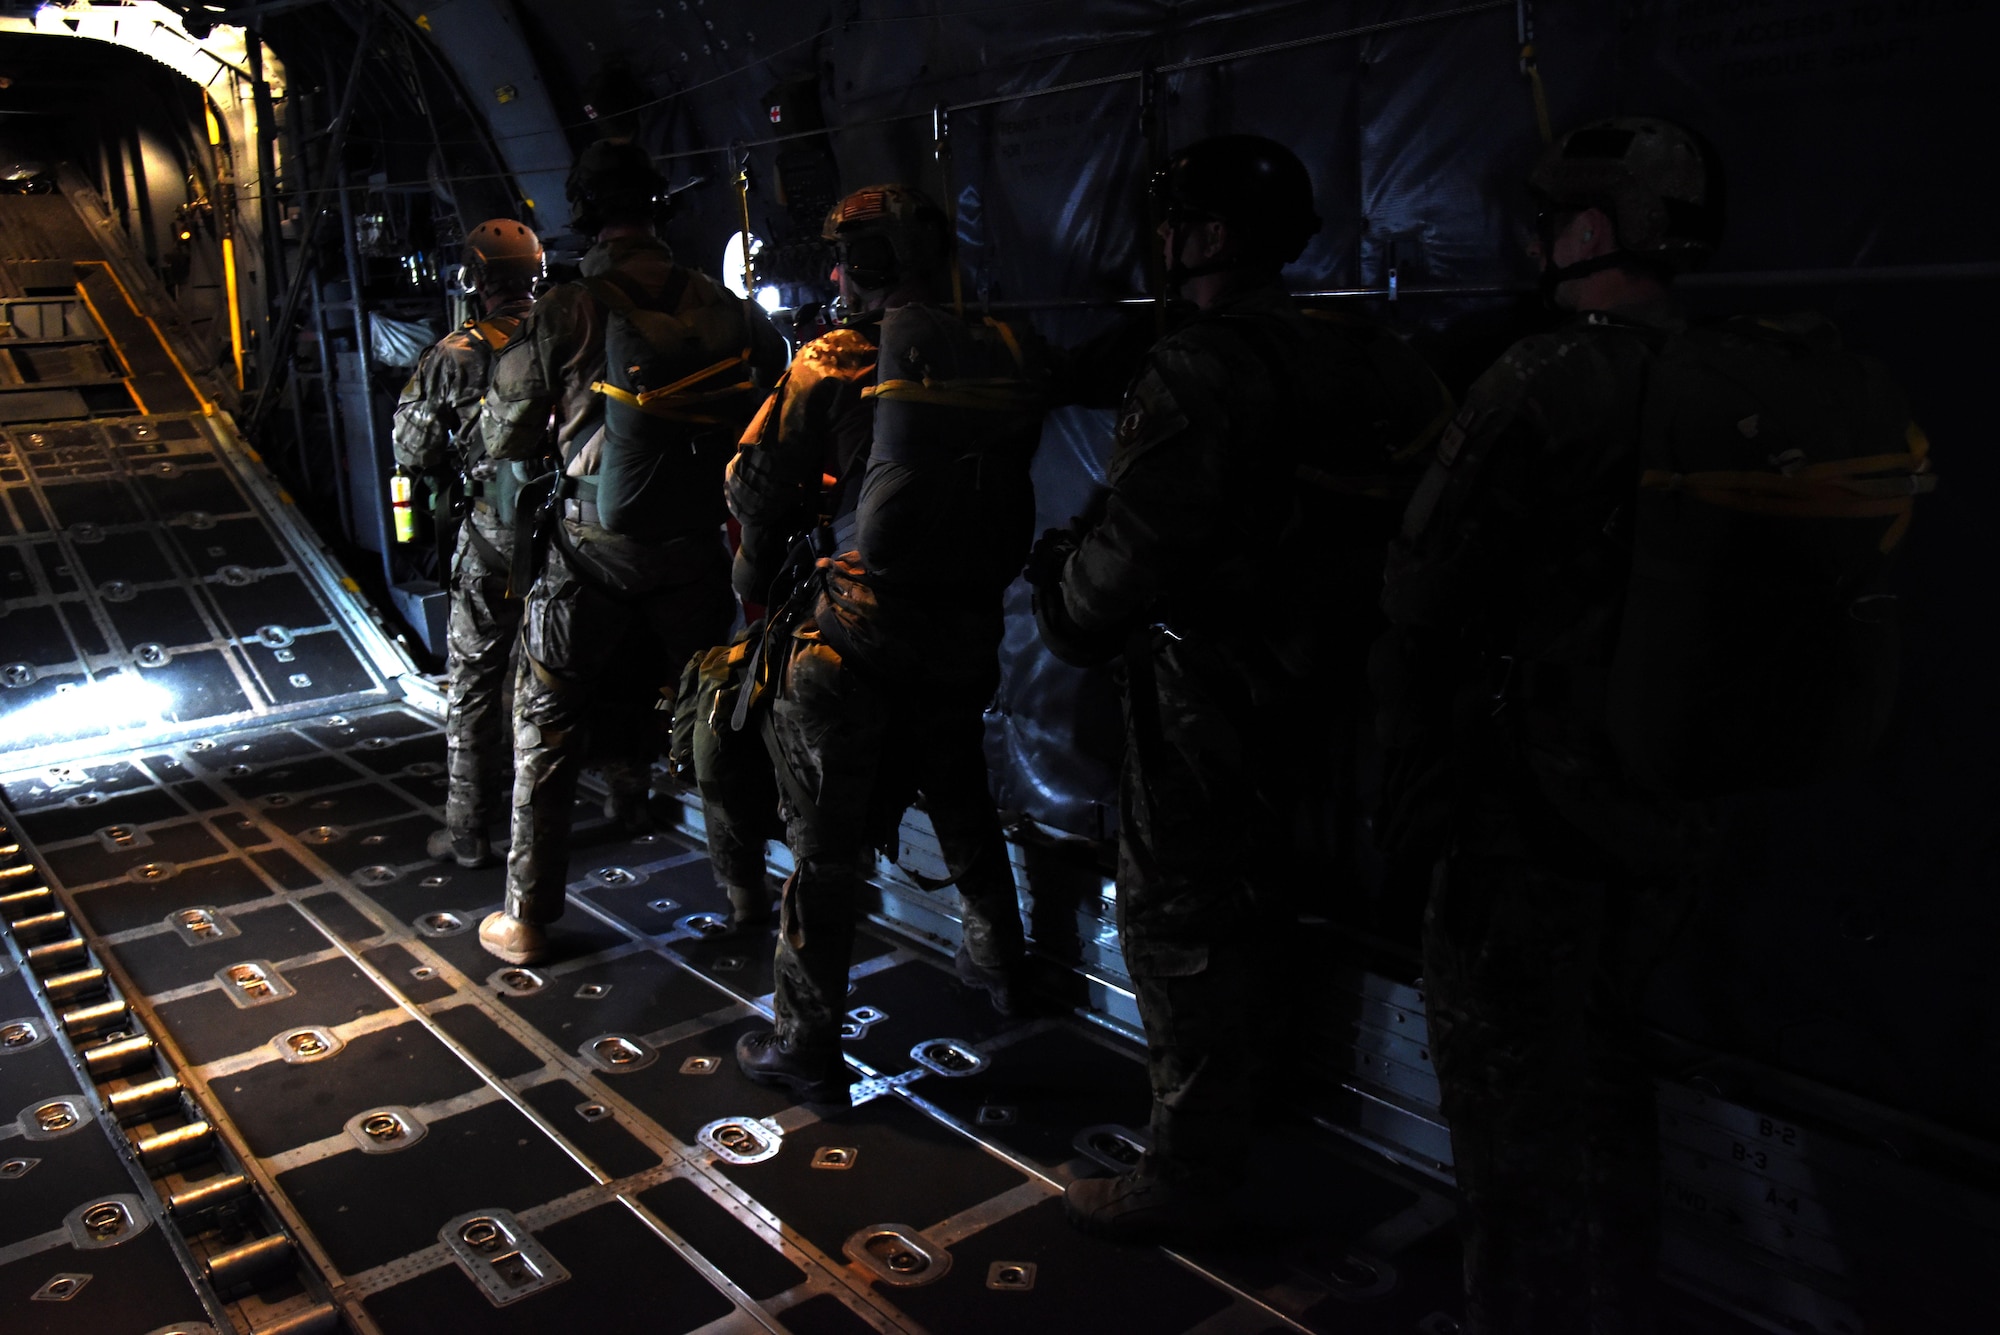 Survival, evasion, resistance and escape specialists prepare to jump from a C-130 Hercules March 3, 2016 as part of Red Flag 16-2 near Nellis Air Force Base, Nevada. More than 10 specialists participated in the two-week exercise which aimed to advance operations effectiveness for worldwide contingencies. (U.S. Air Force photo/Staff Sgt. Chuck Broadway)